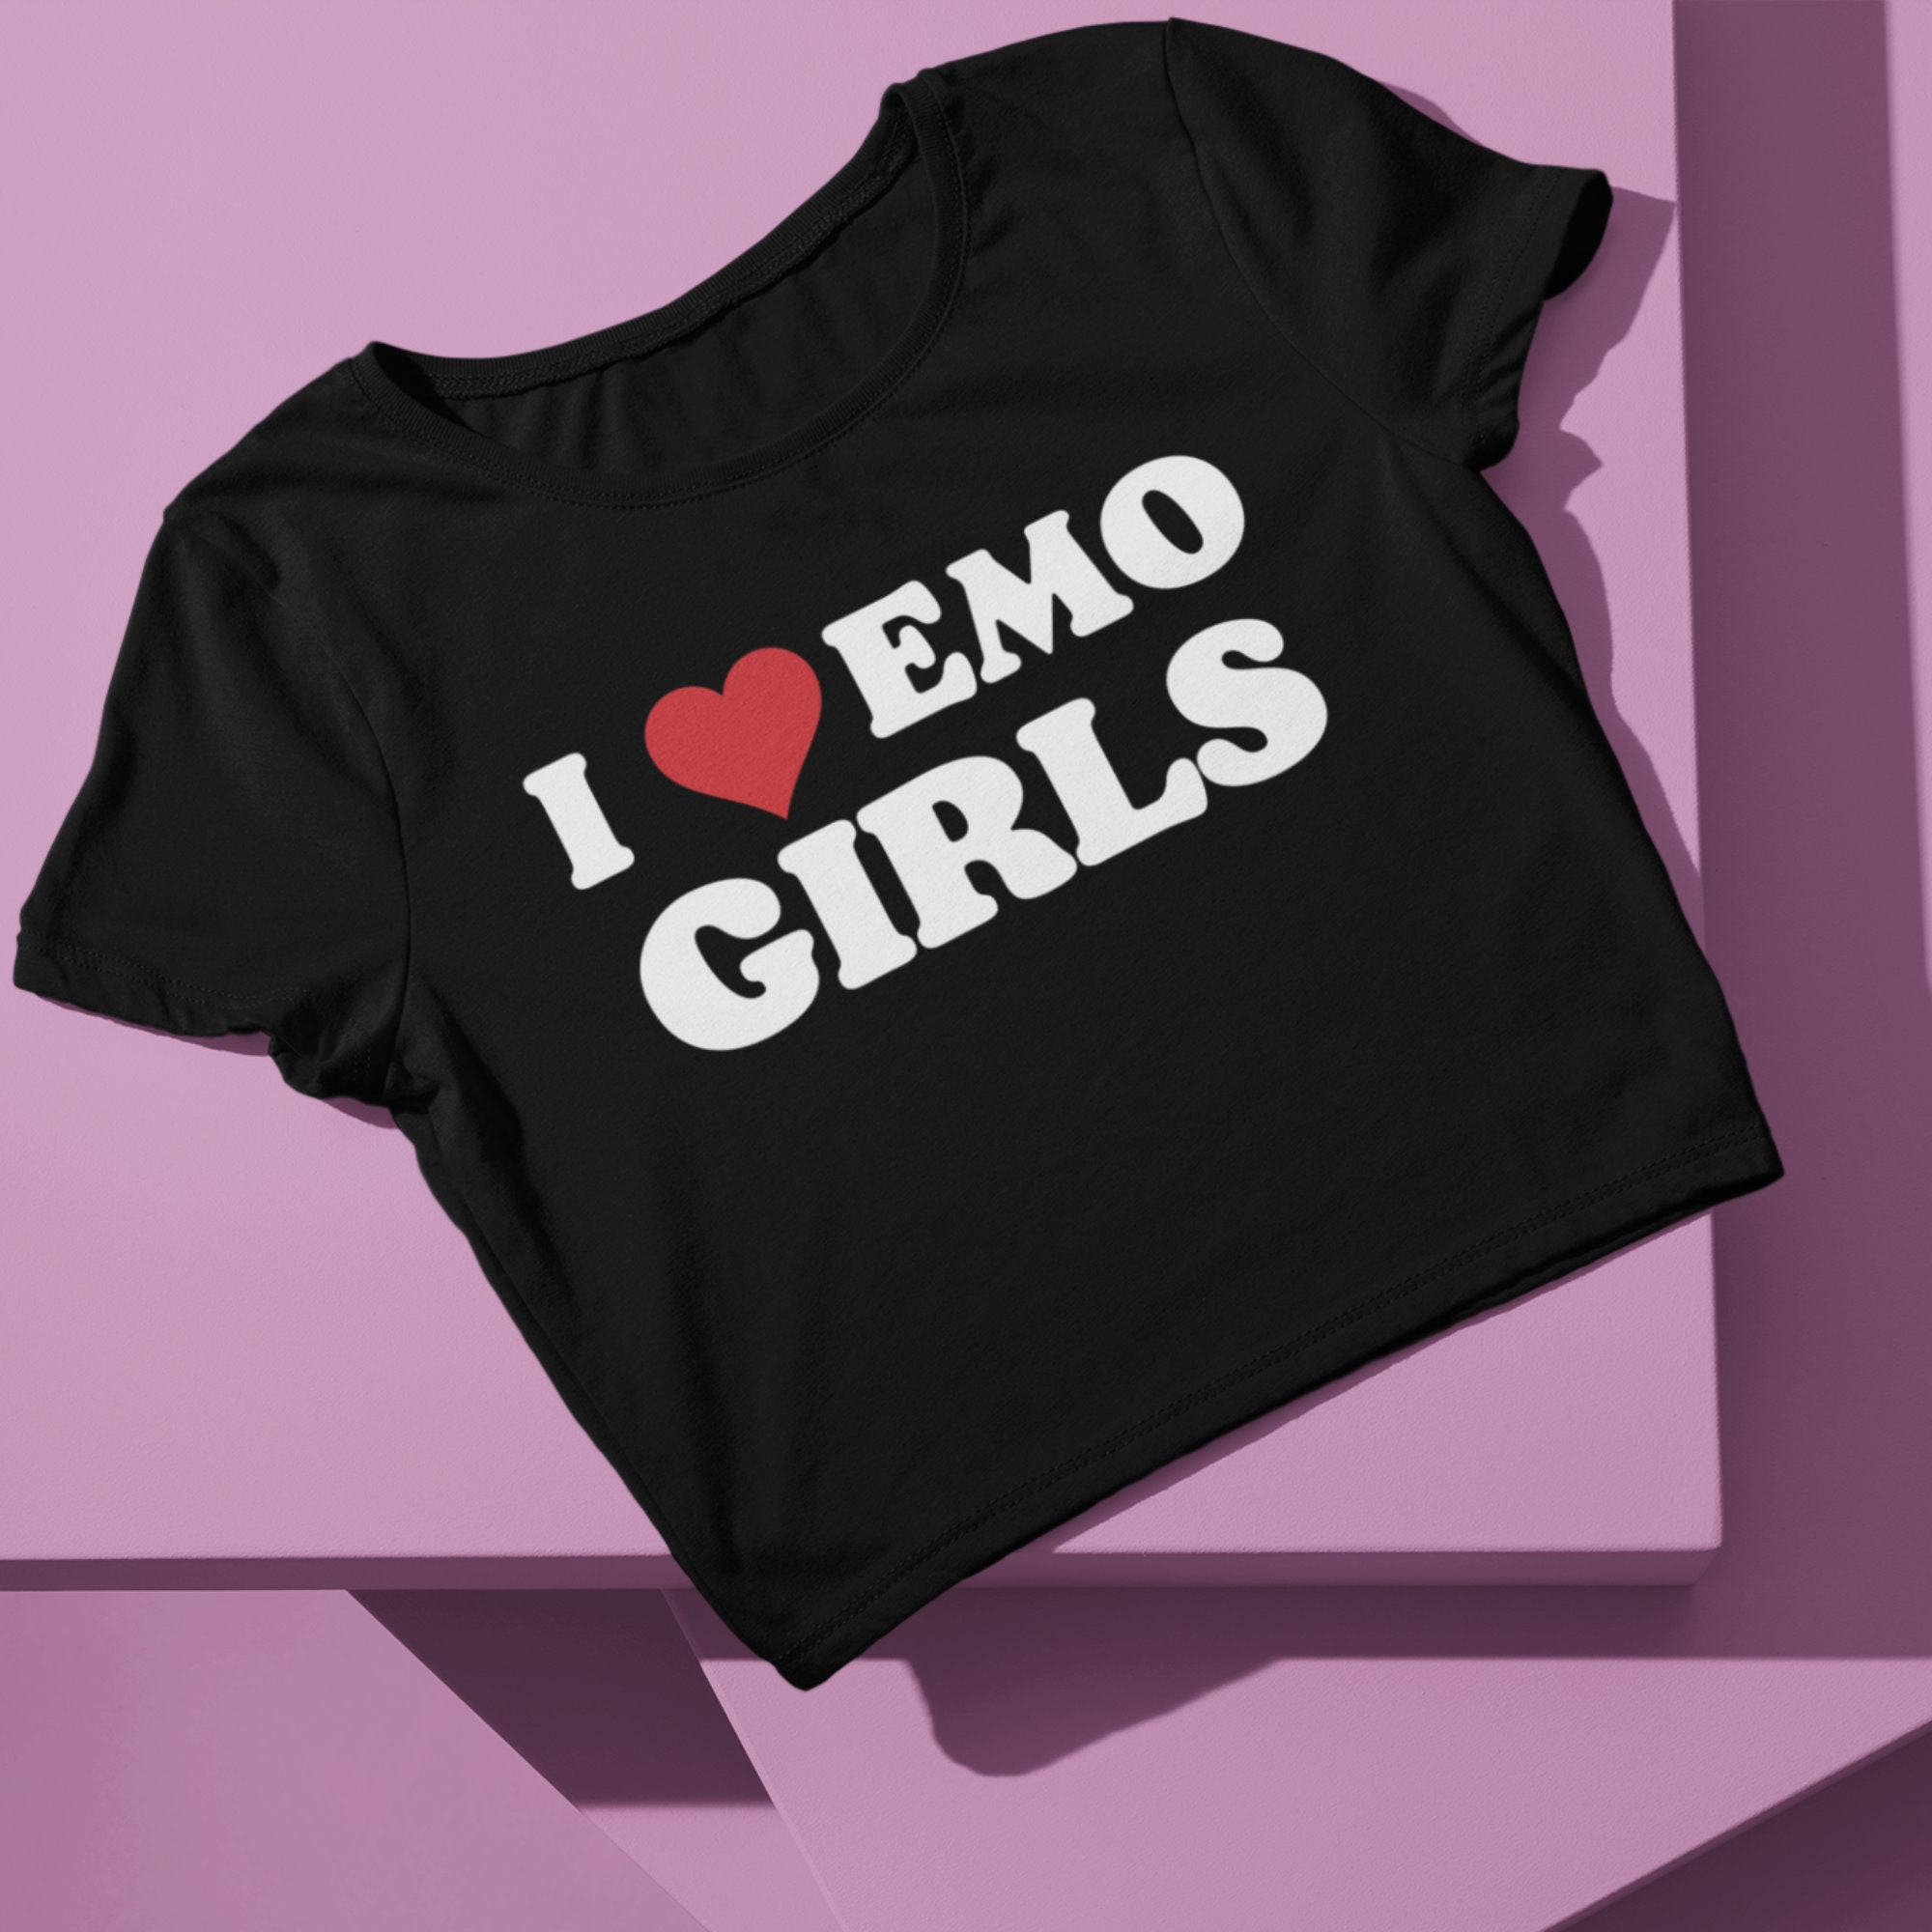  I LOVE HEART EMO GIRLS T-Shirt : Clothing, Shoes & Jewelry